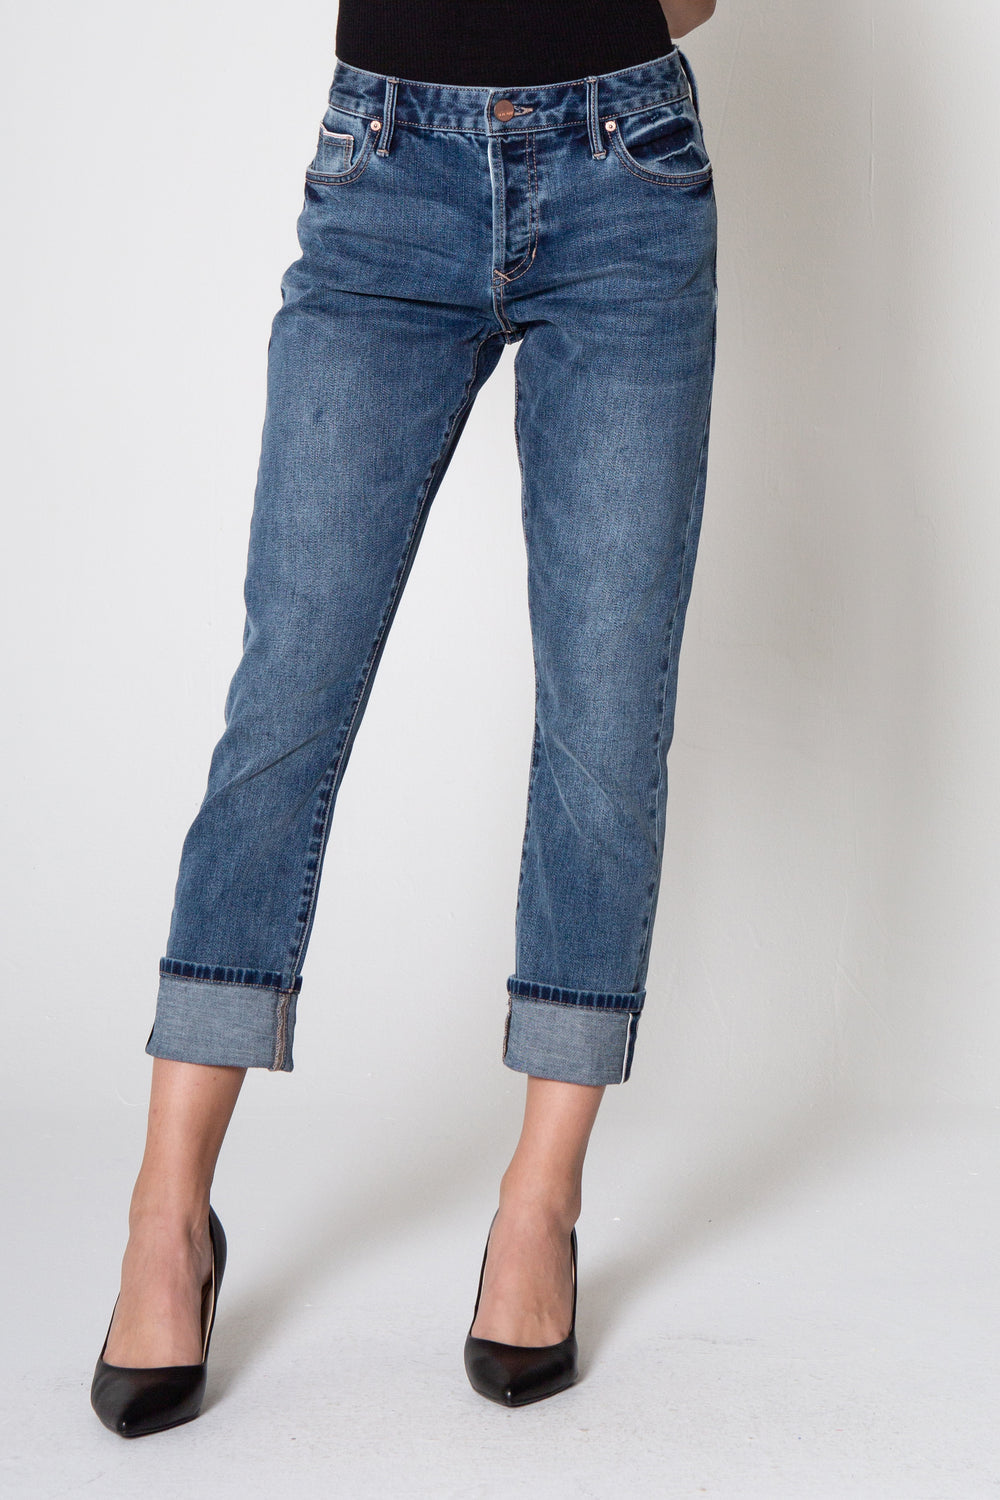 image of a female model wearing a 9 1/2" BLAIRE HIGH RISE SLIM STRAIGHT IN COTTON DEAR JOHN DENIM 